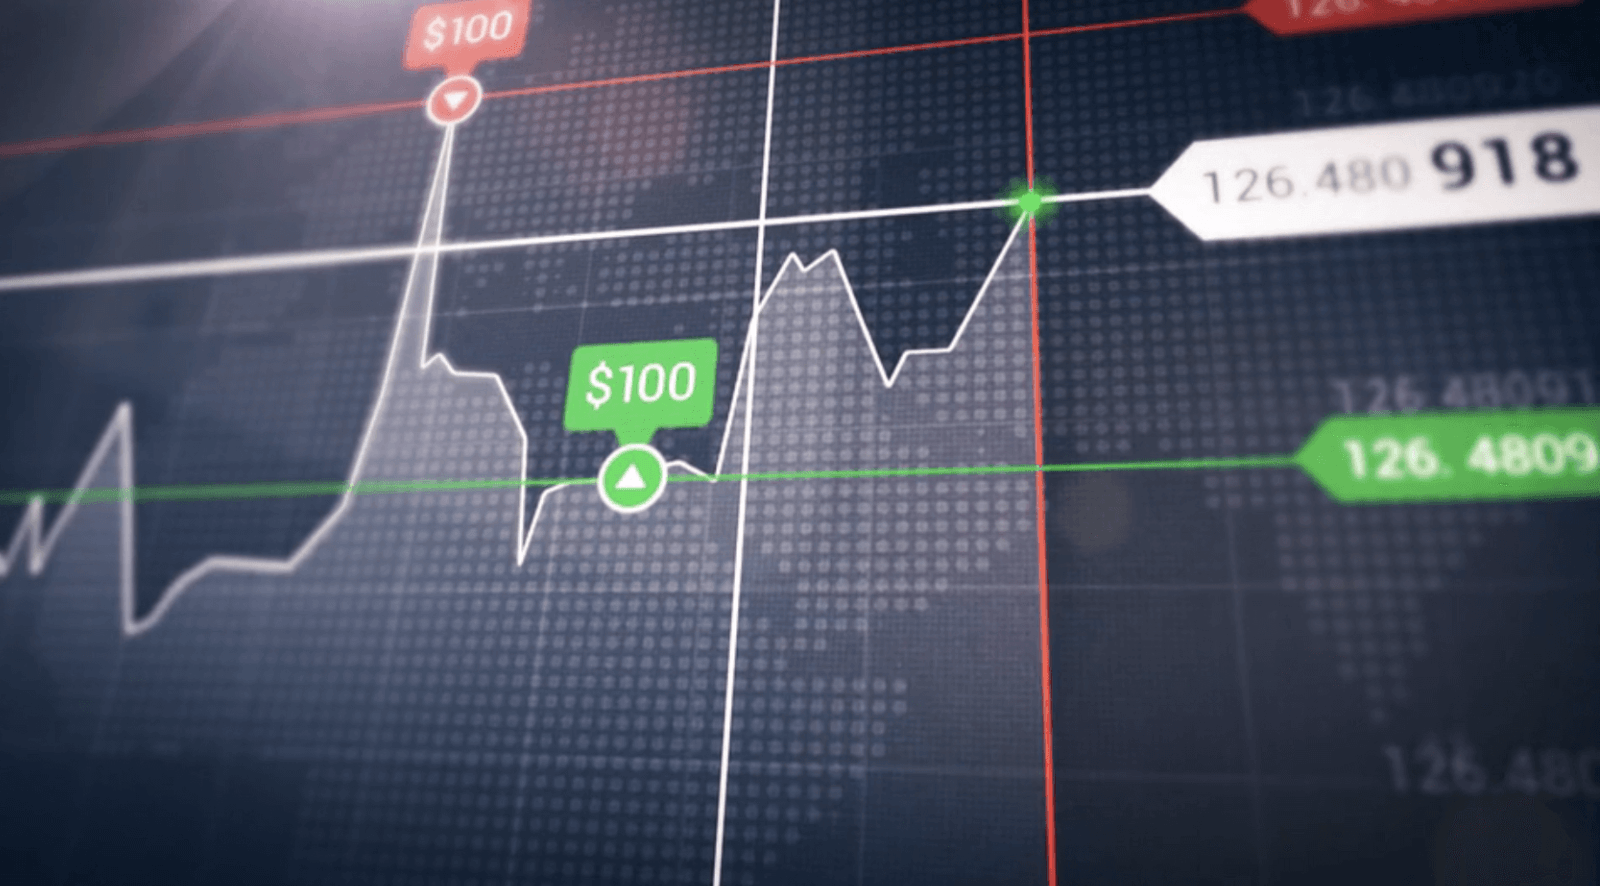 Binary options trade and how it works